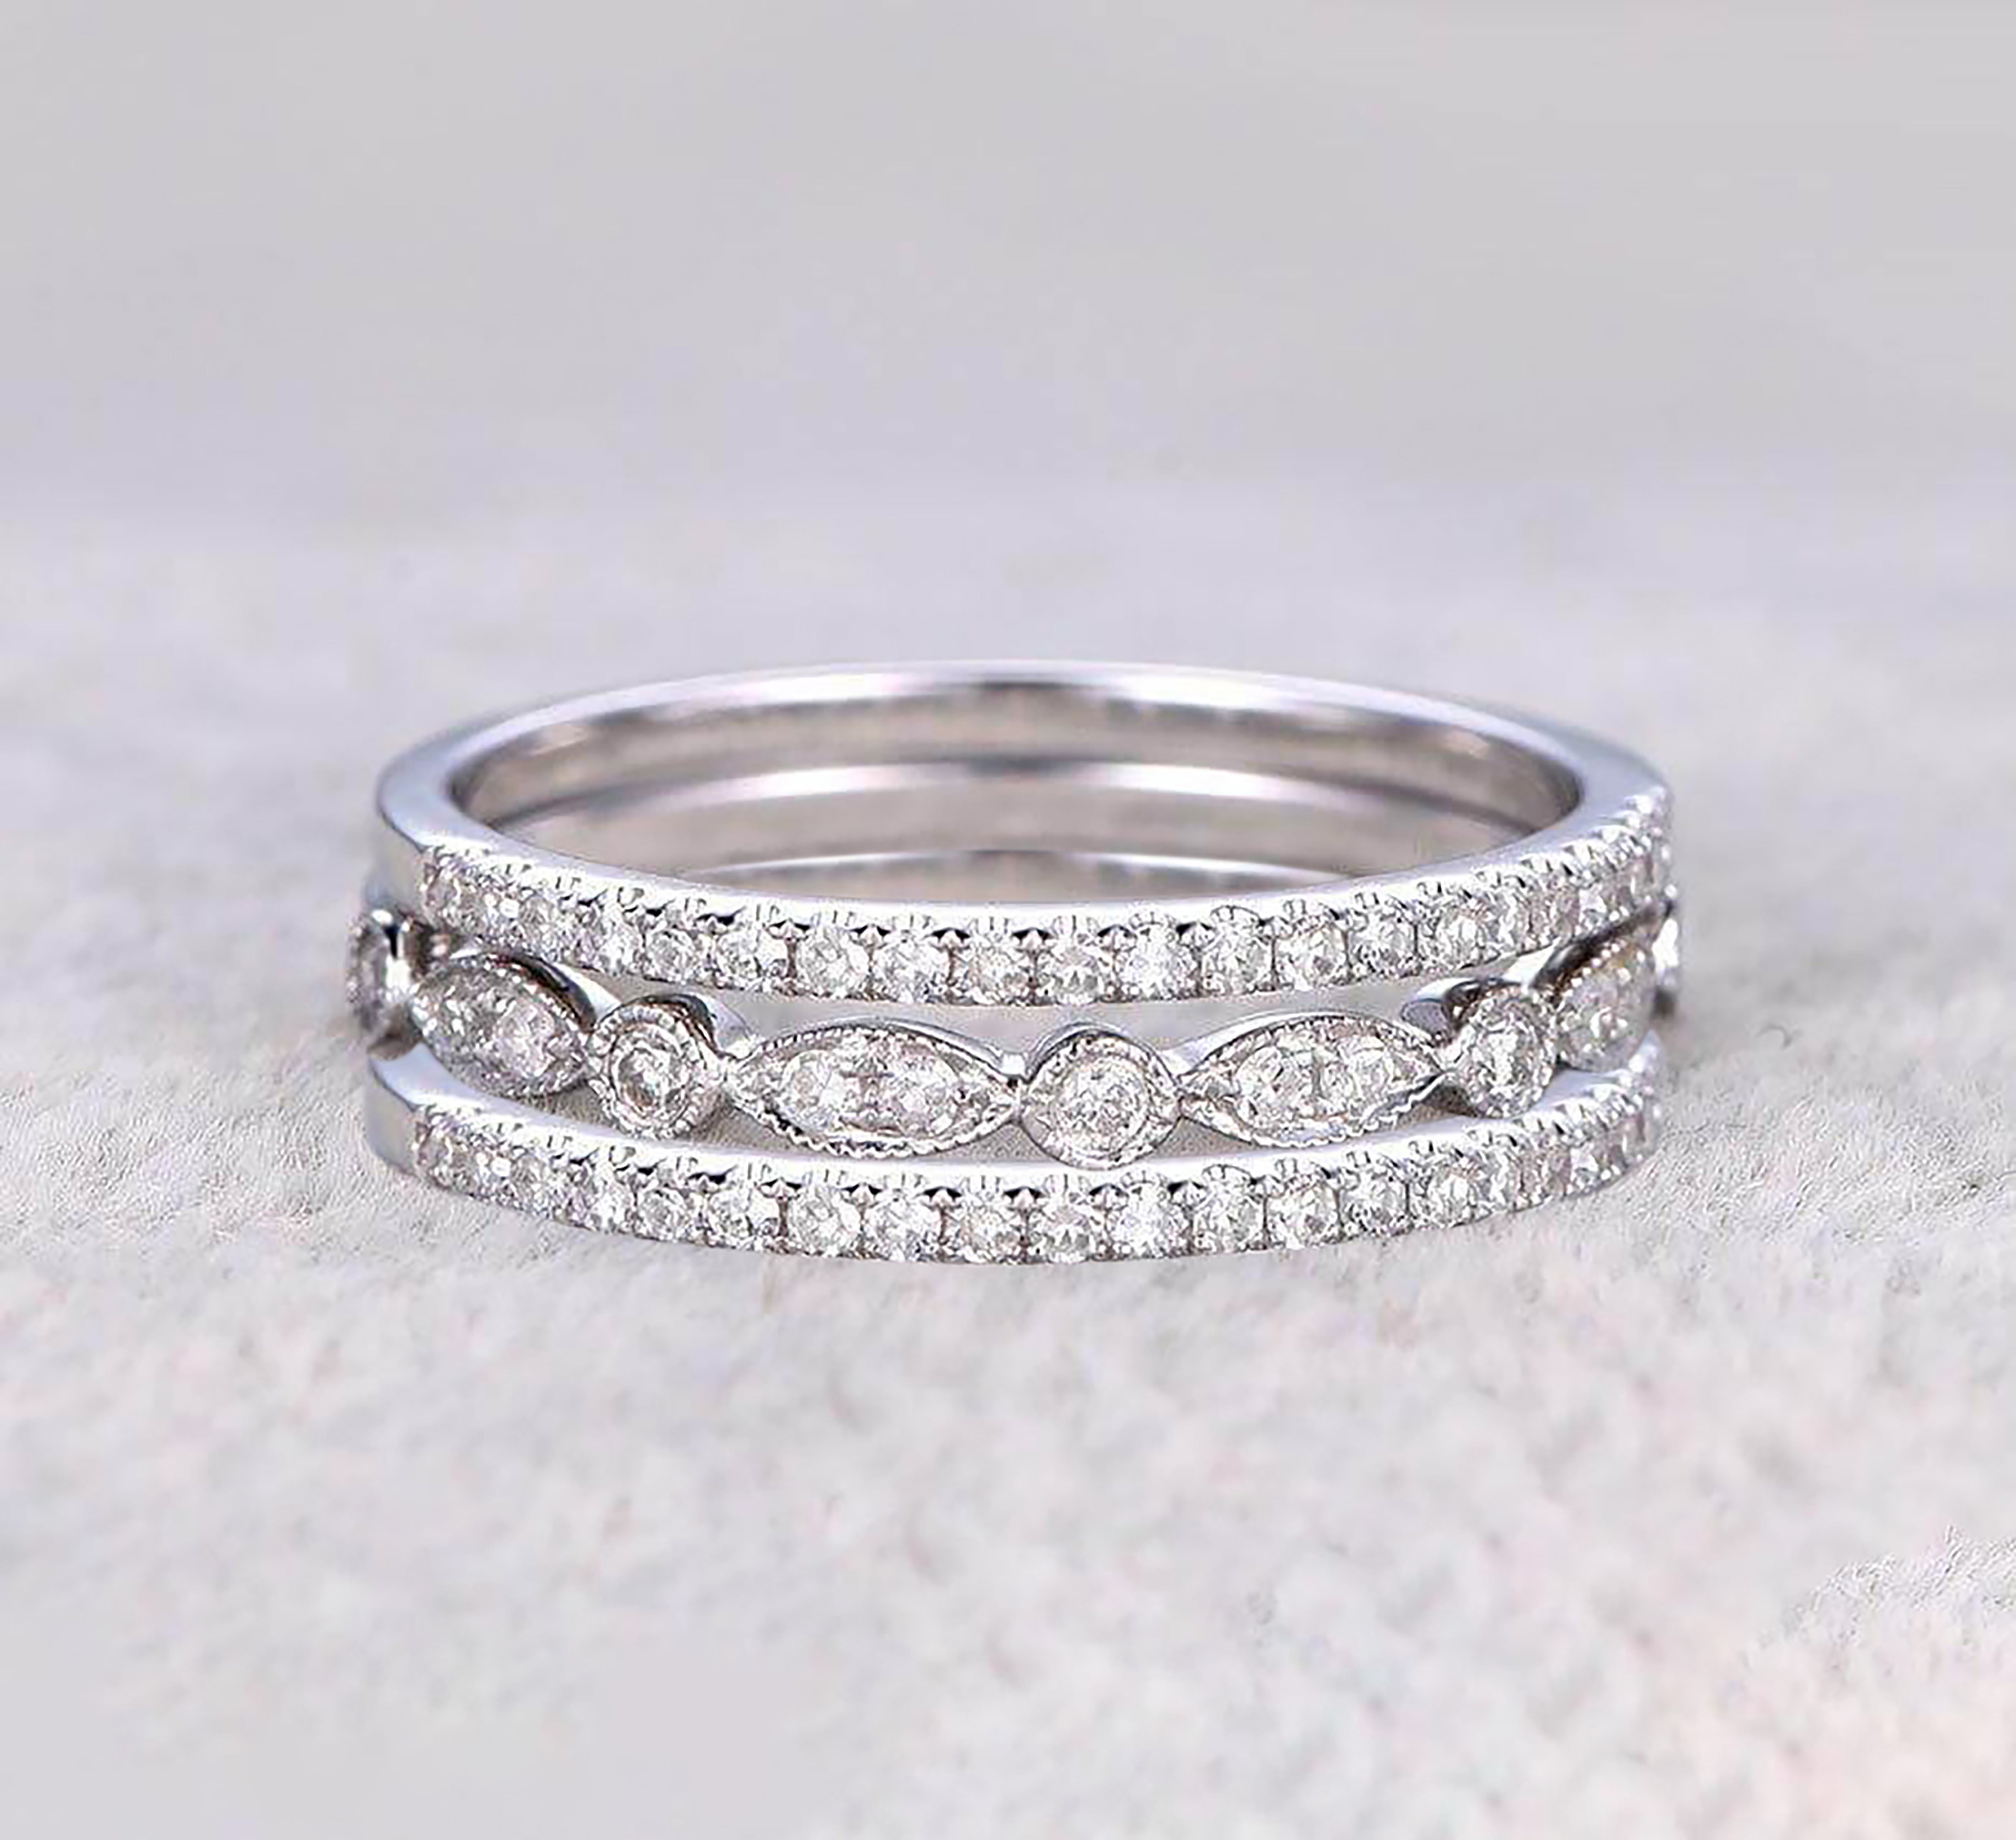 1 50 Carat 3 Wedding Ring set Wedding Band Stackable Ring set Anniversary Ring Trio Ring 925 Sterling Silver With 18k White Gold Plating df897ea8 7ee7 4080 9d30 083e6db7199f.539f249e920c5a8ee0aea43bb1b75dab